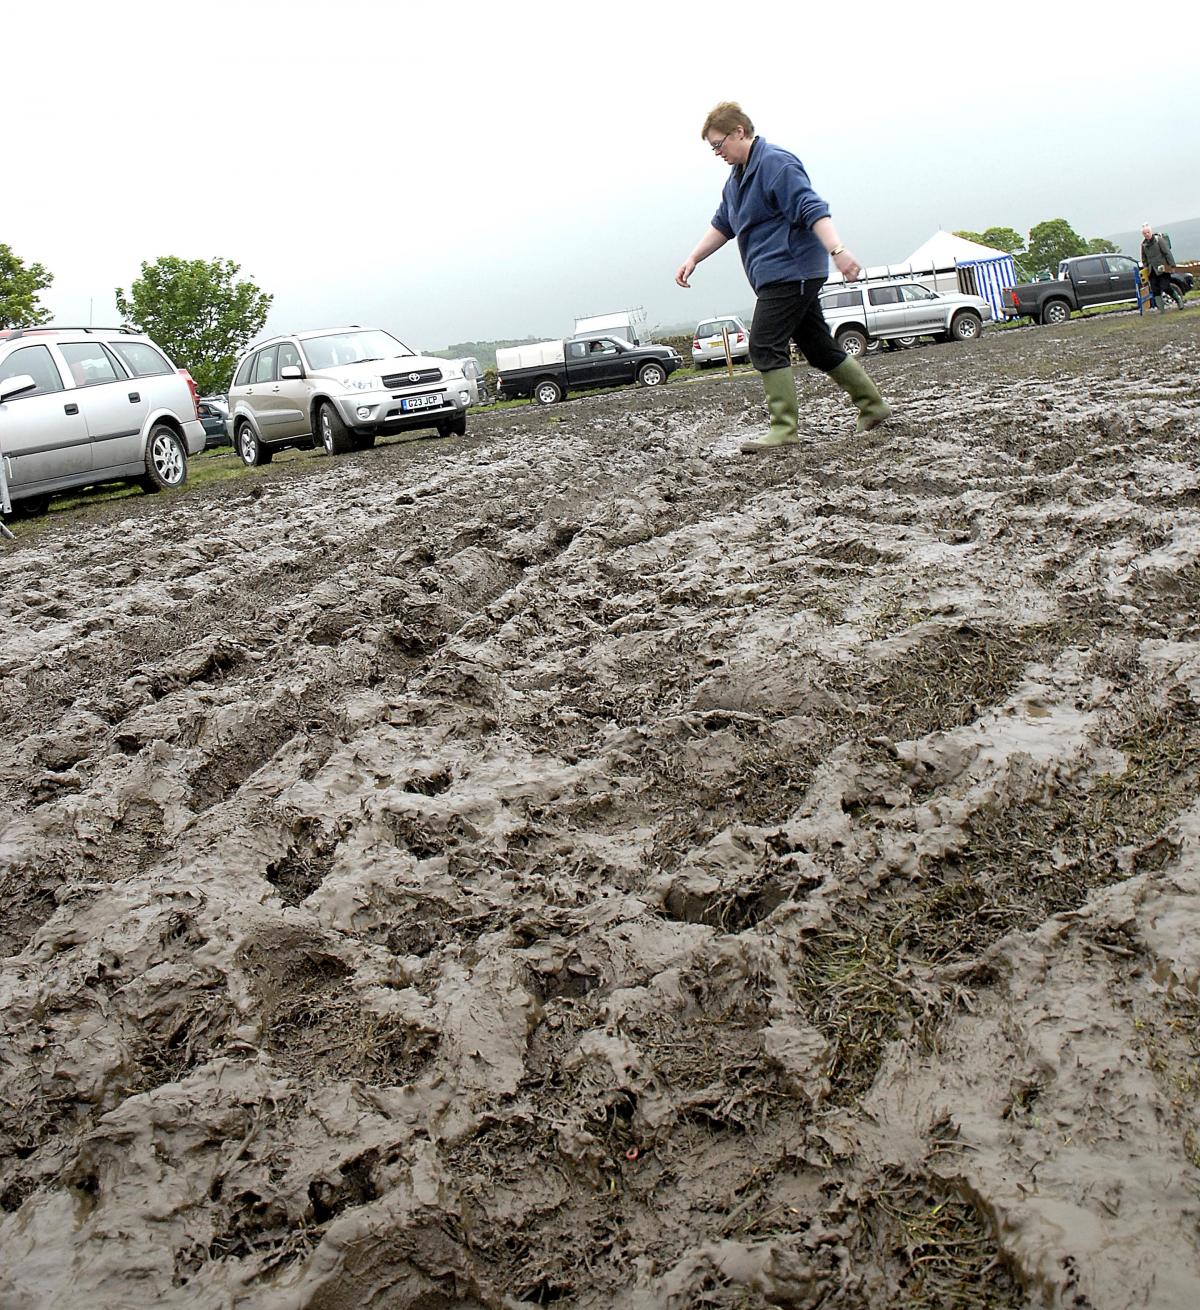 A visitors squelches through the mud at Otley Show.